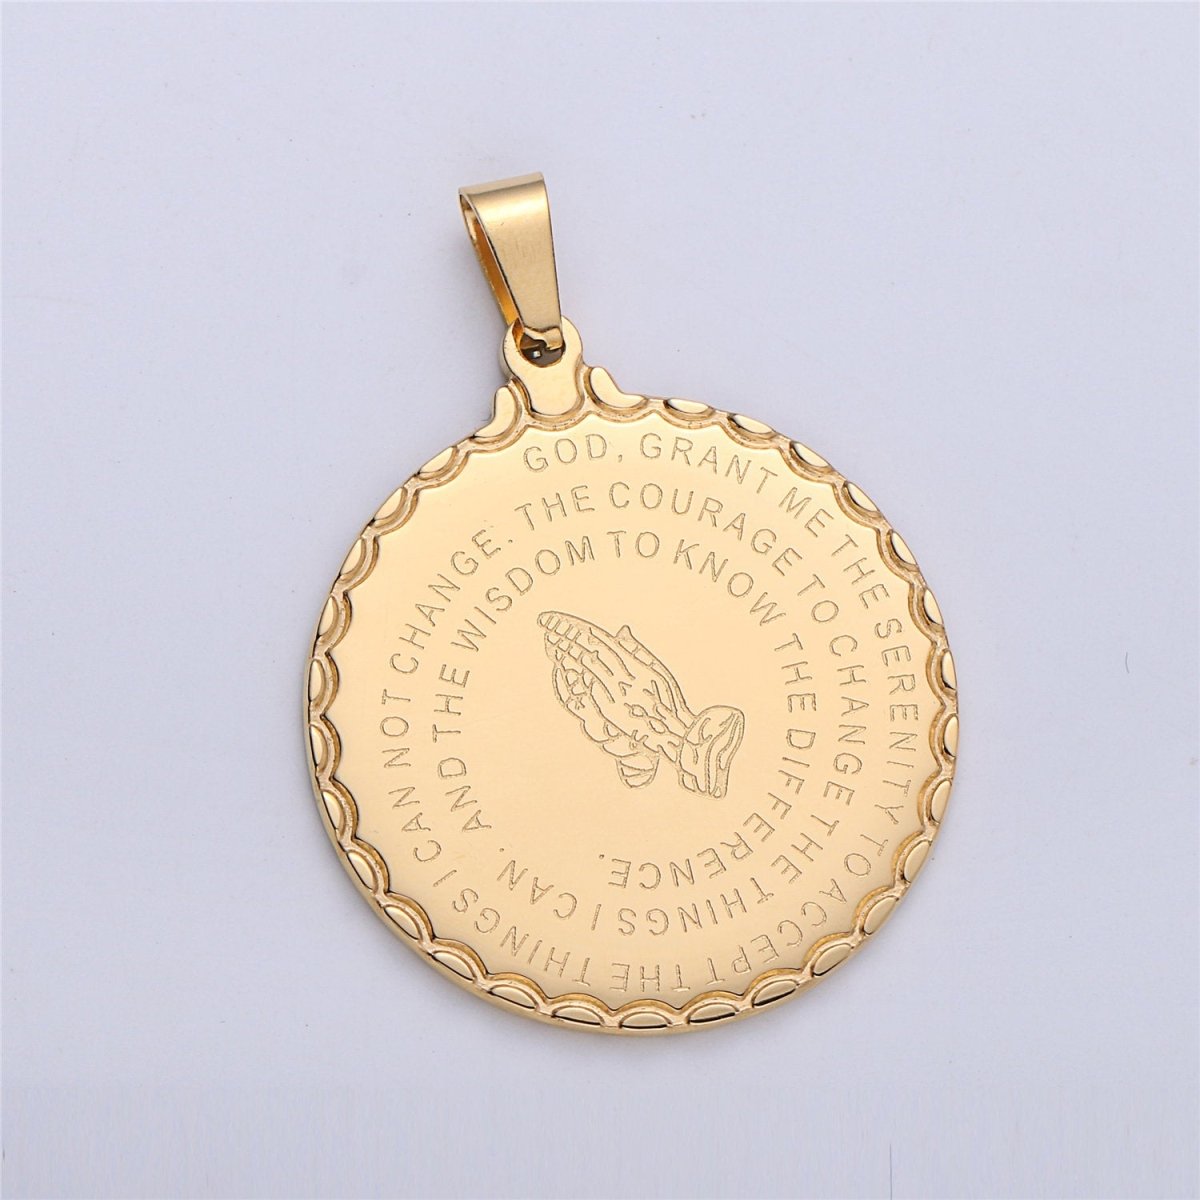 Gold Filled Double Sided Serenity Prayer & Lords Prayer Stainless Steel Charm - Lord grant me Coin Medallion Pendant Religious Jewelry J-724 J-727 - DLUXCA